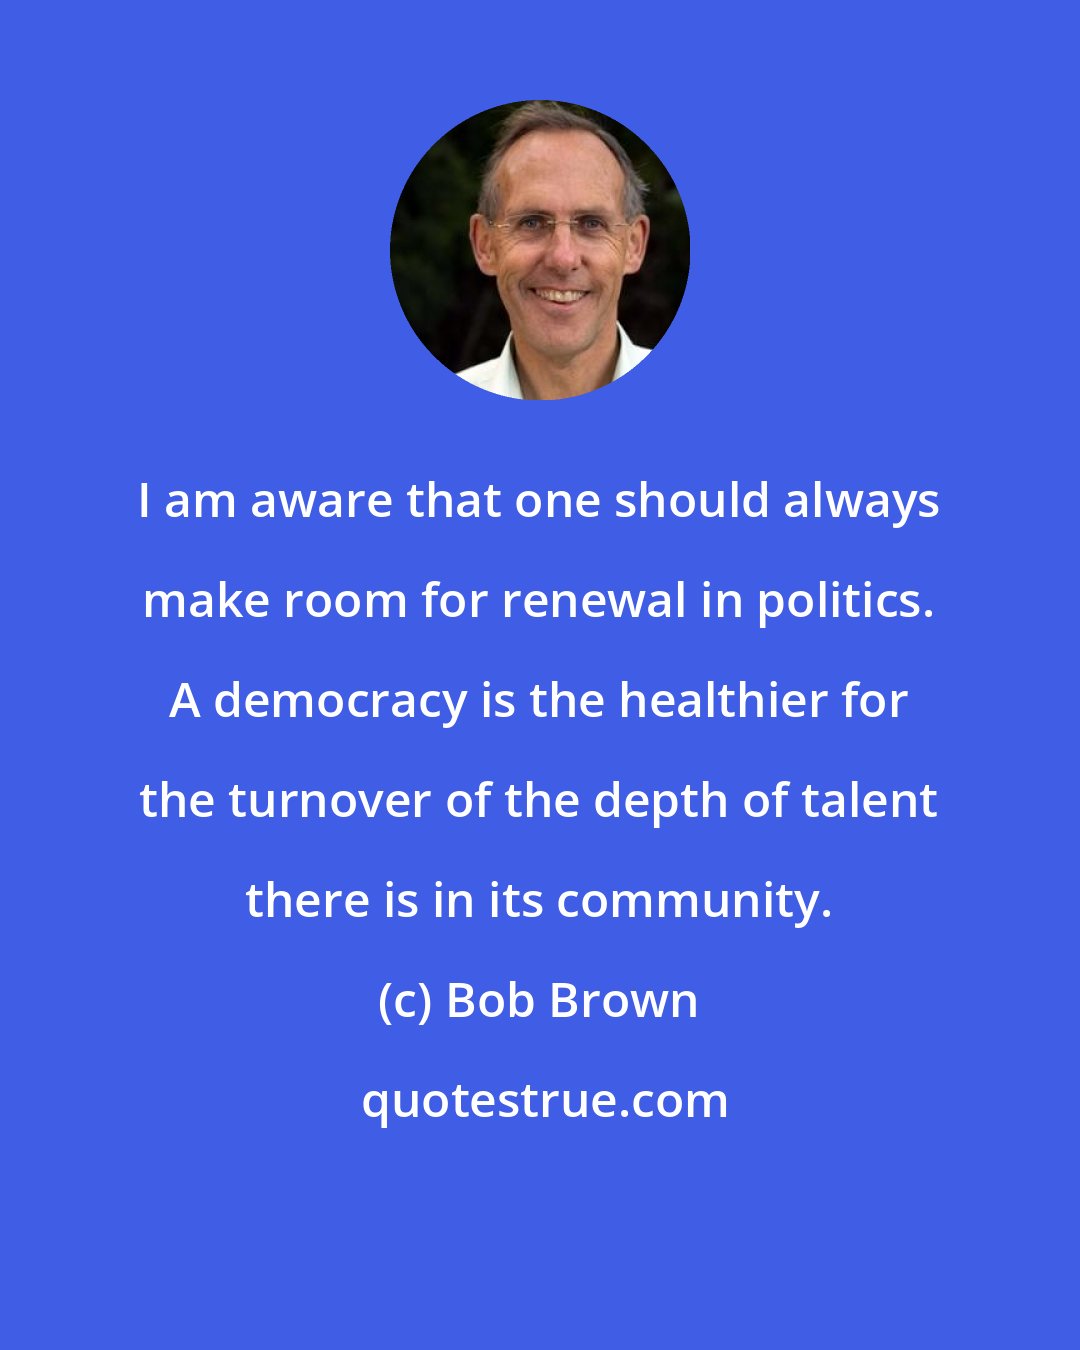 Bob Brown: I am aware that one should always make room for renewal in politics. A democracy is the healthier for the turnover of the depth of talent there is in its community.